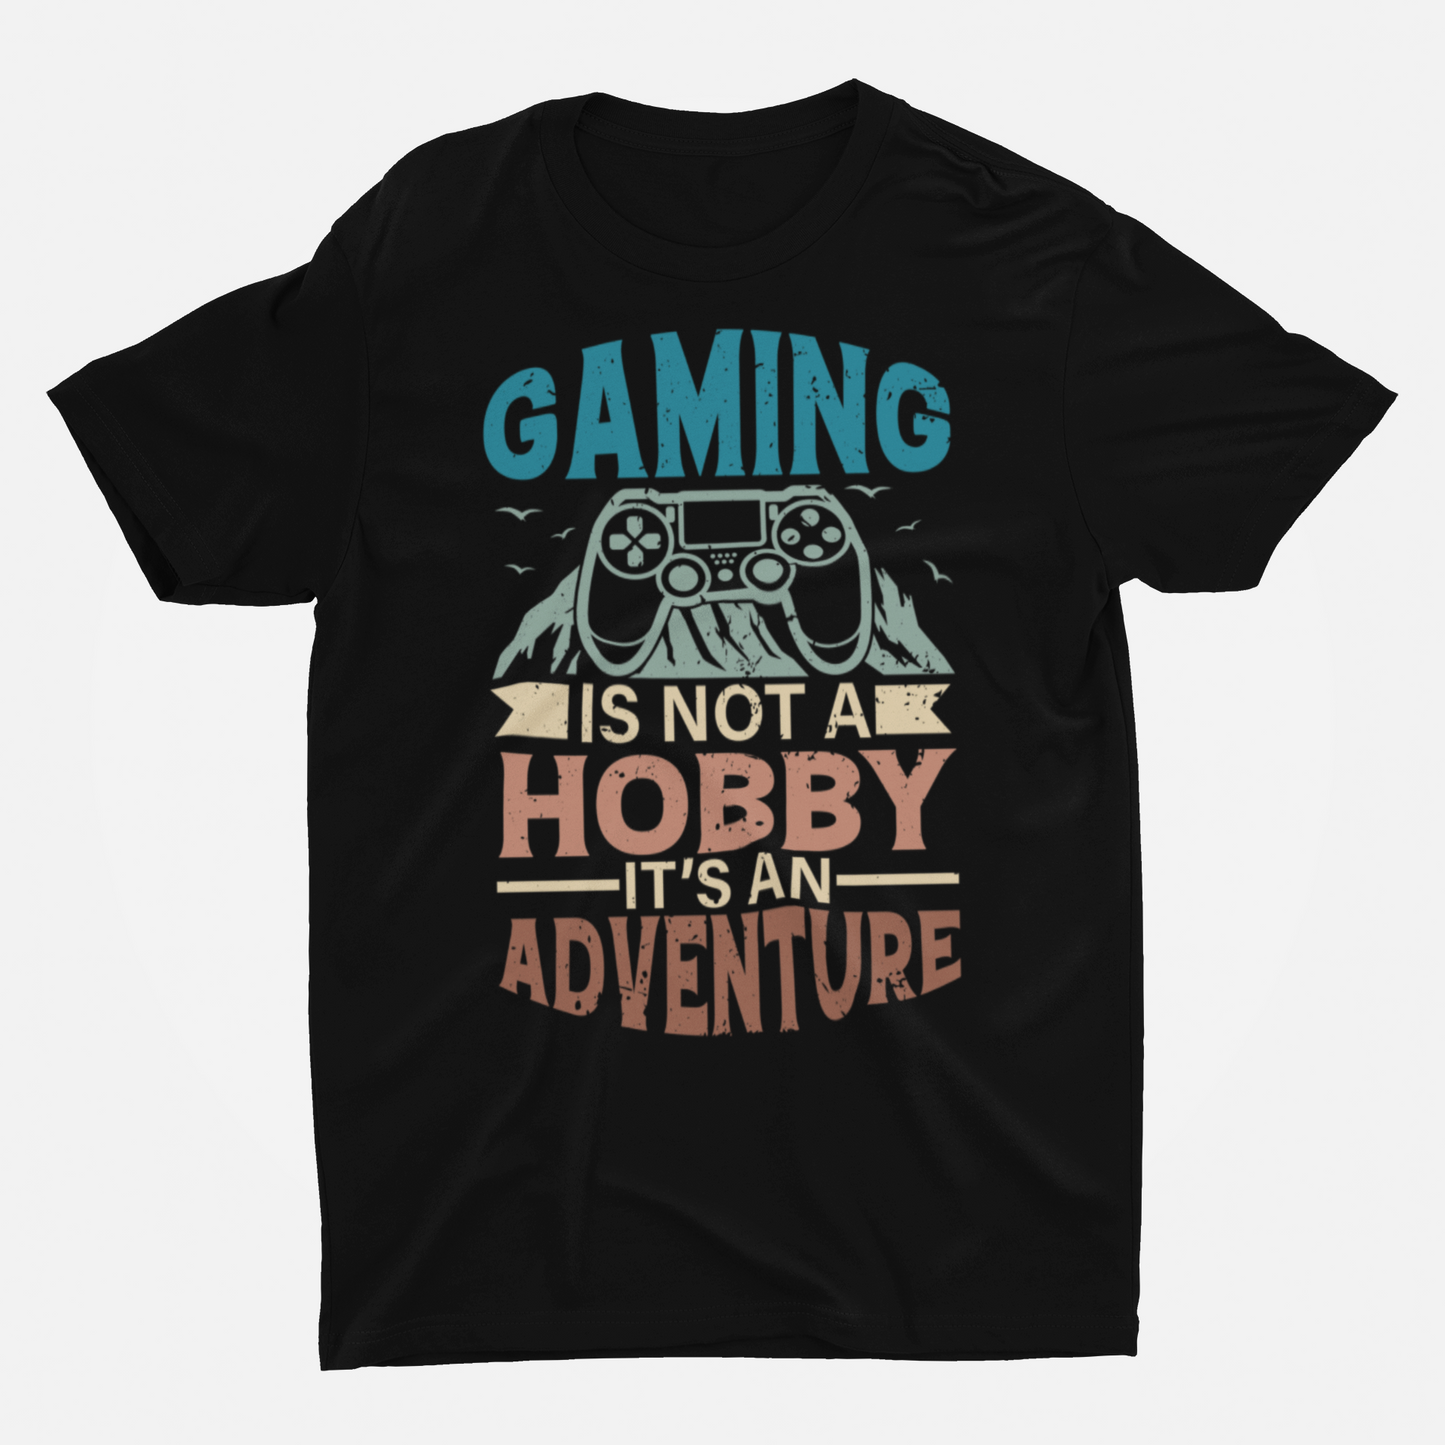 Gaming Is Not A Hobby Black Round Neck T-Shirt for Men